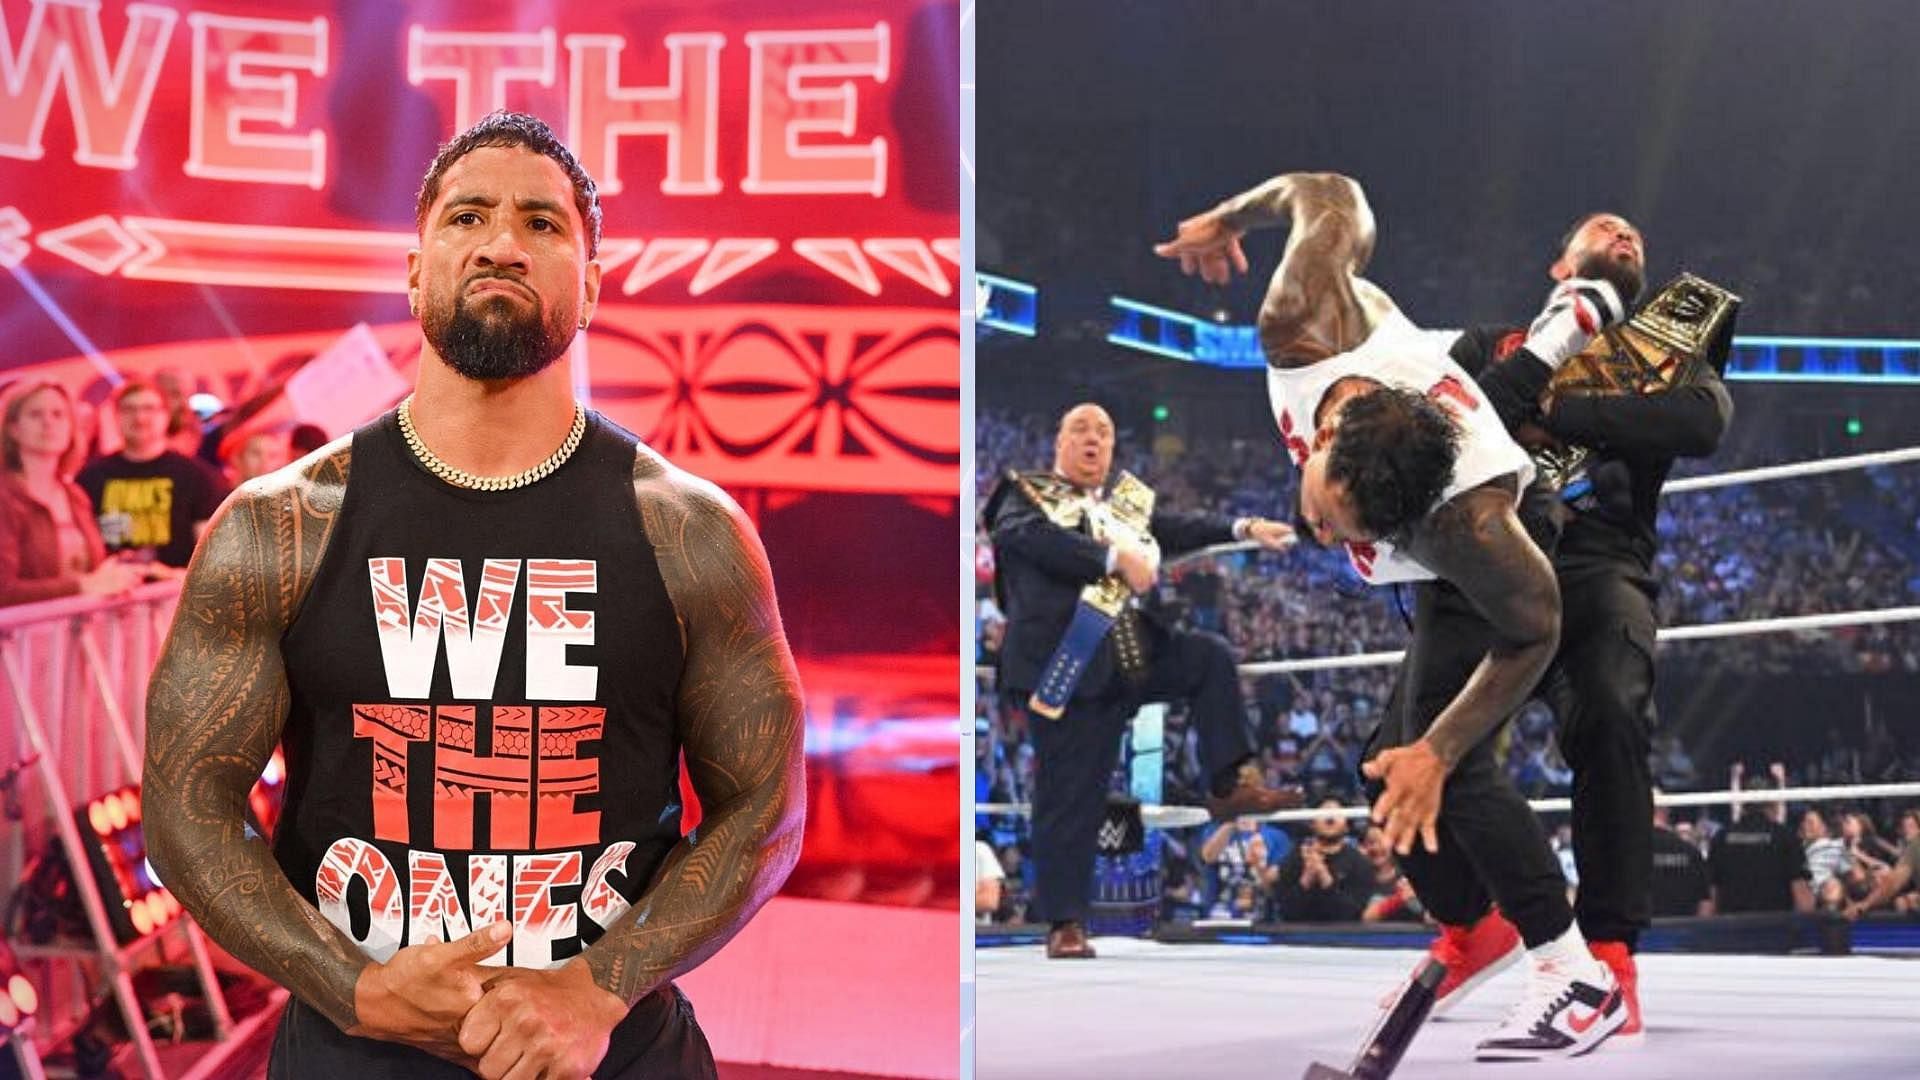 Jey Uso Superkicks Roman Reigns, Leaves The Bloodline On WWE SmackDown